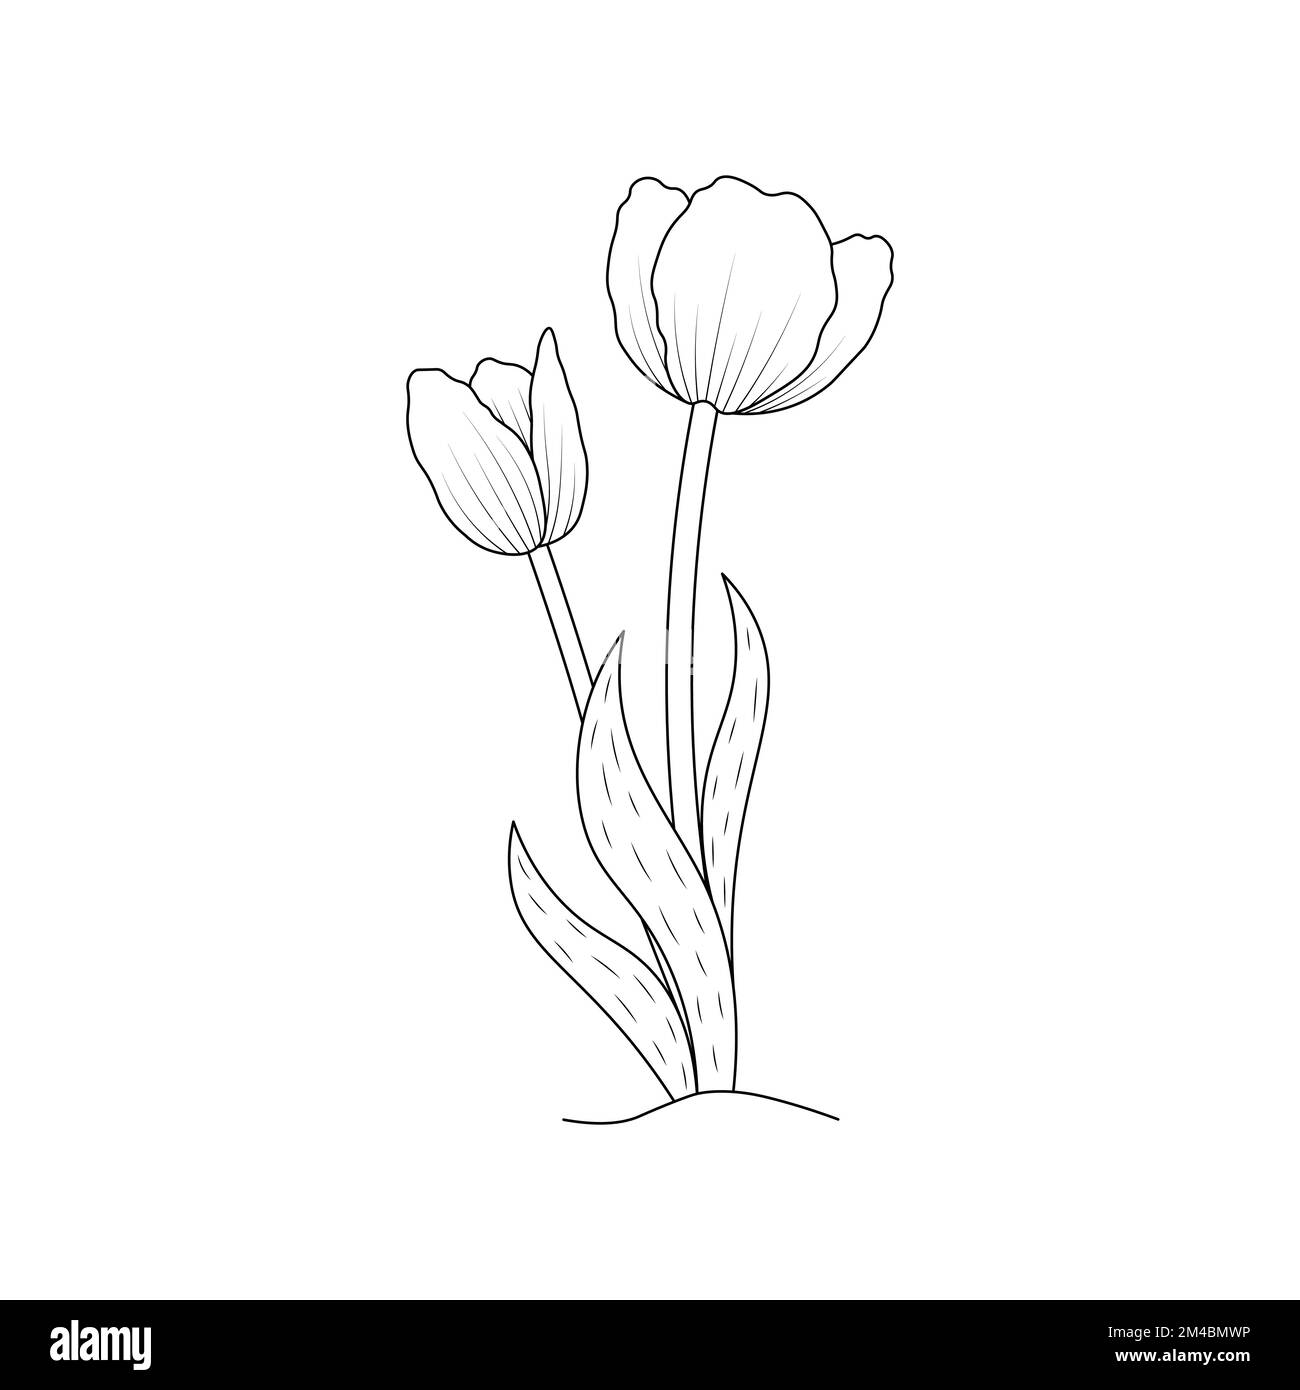 Drooping tulips stock vector images